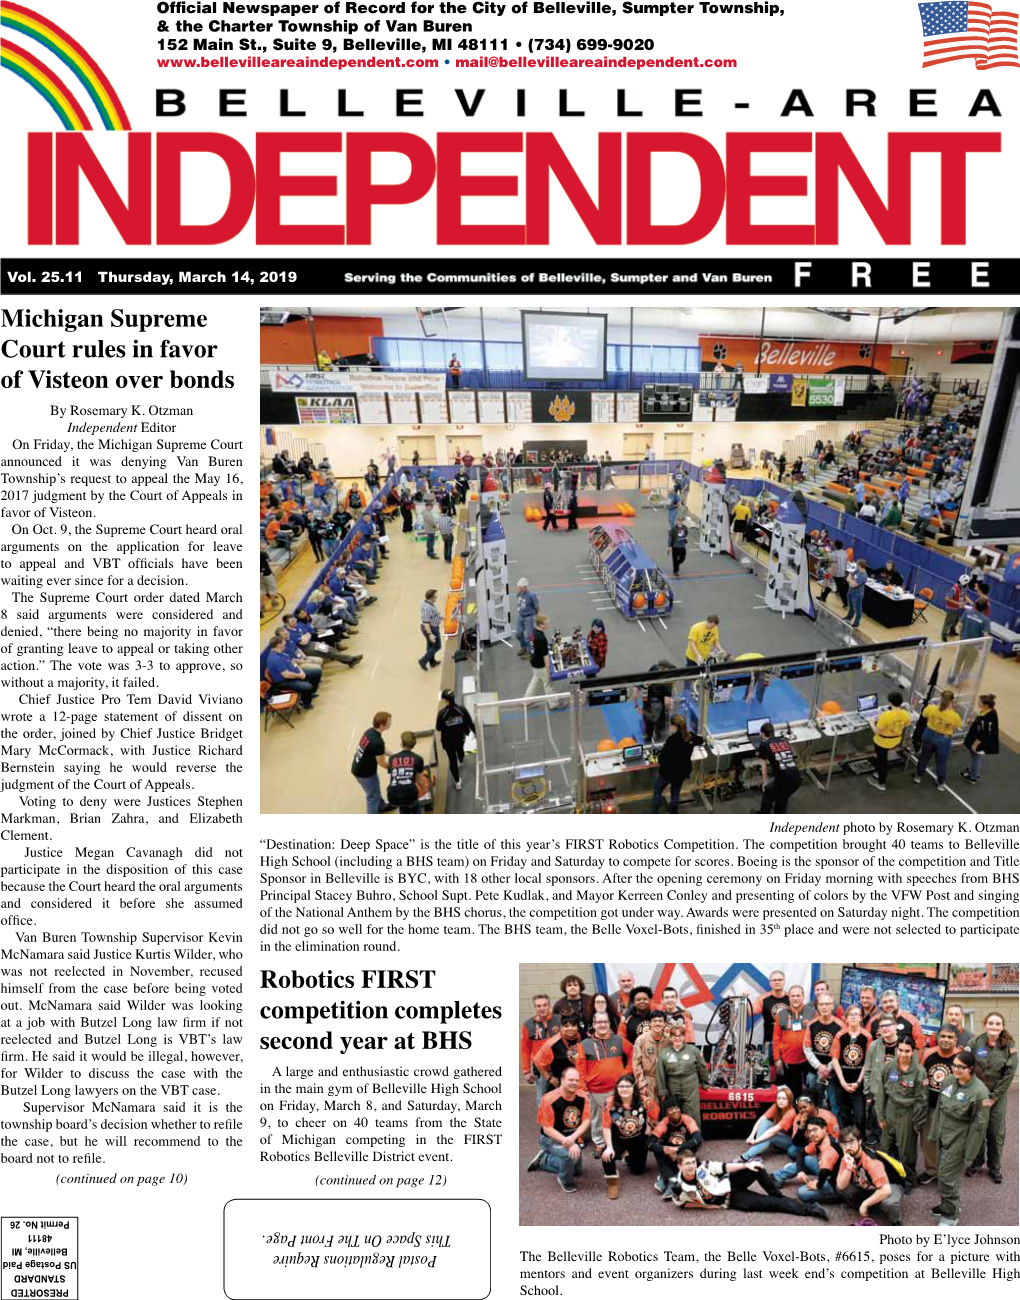 Belleville-Area Independent Is a Free, Weekly Newspaper at Van Buren Township, Has Completed *** Published Each Thursday in Belleville, MI